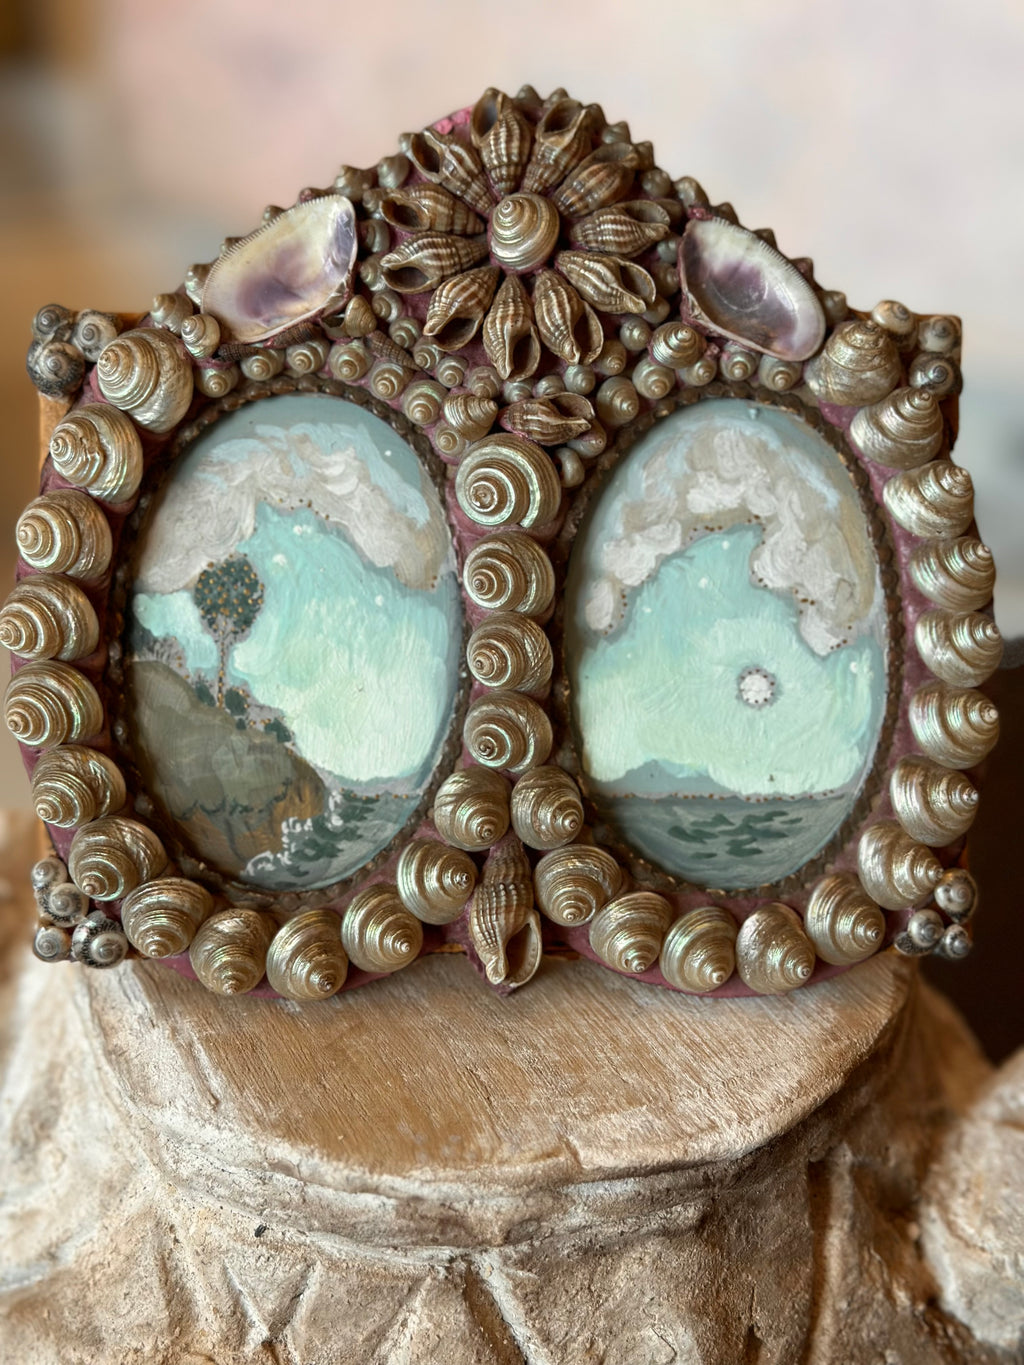 For Cate - an oil painting of Otherland within an antique seashell frame